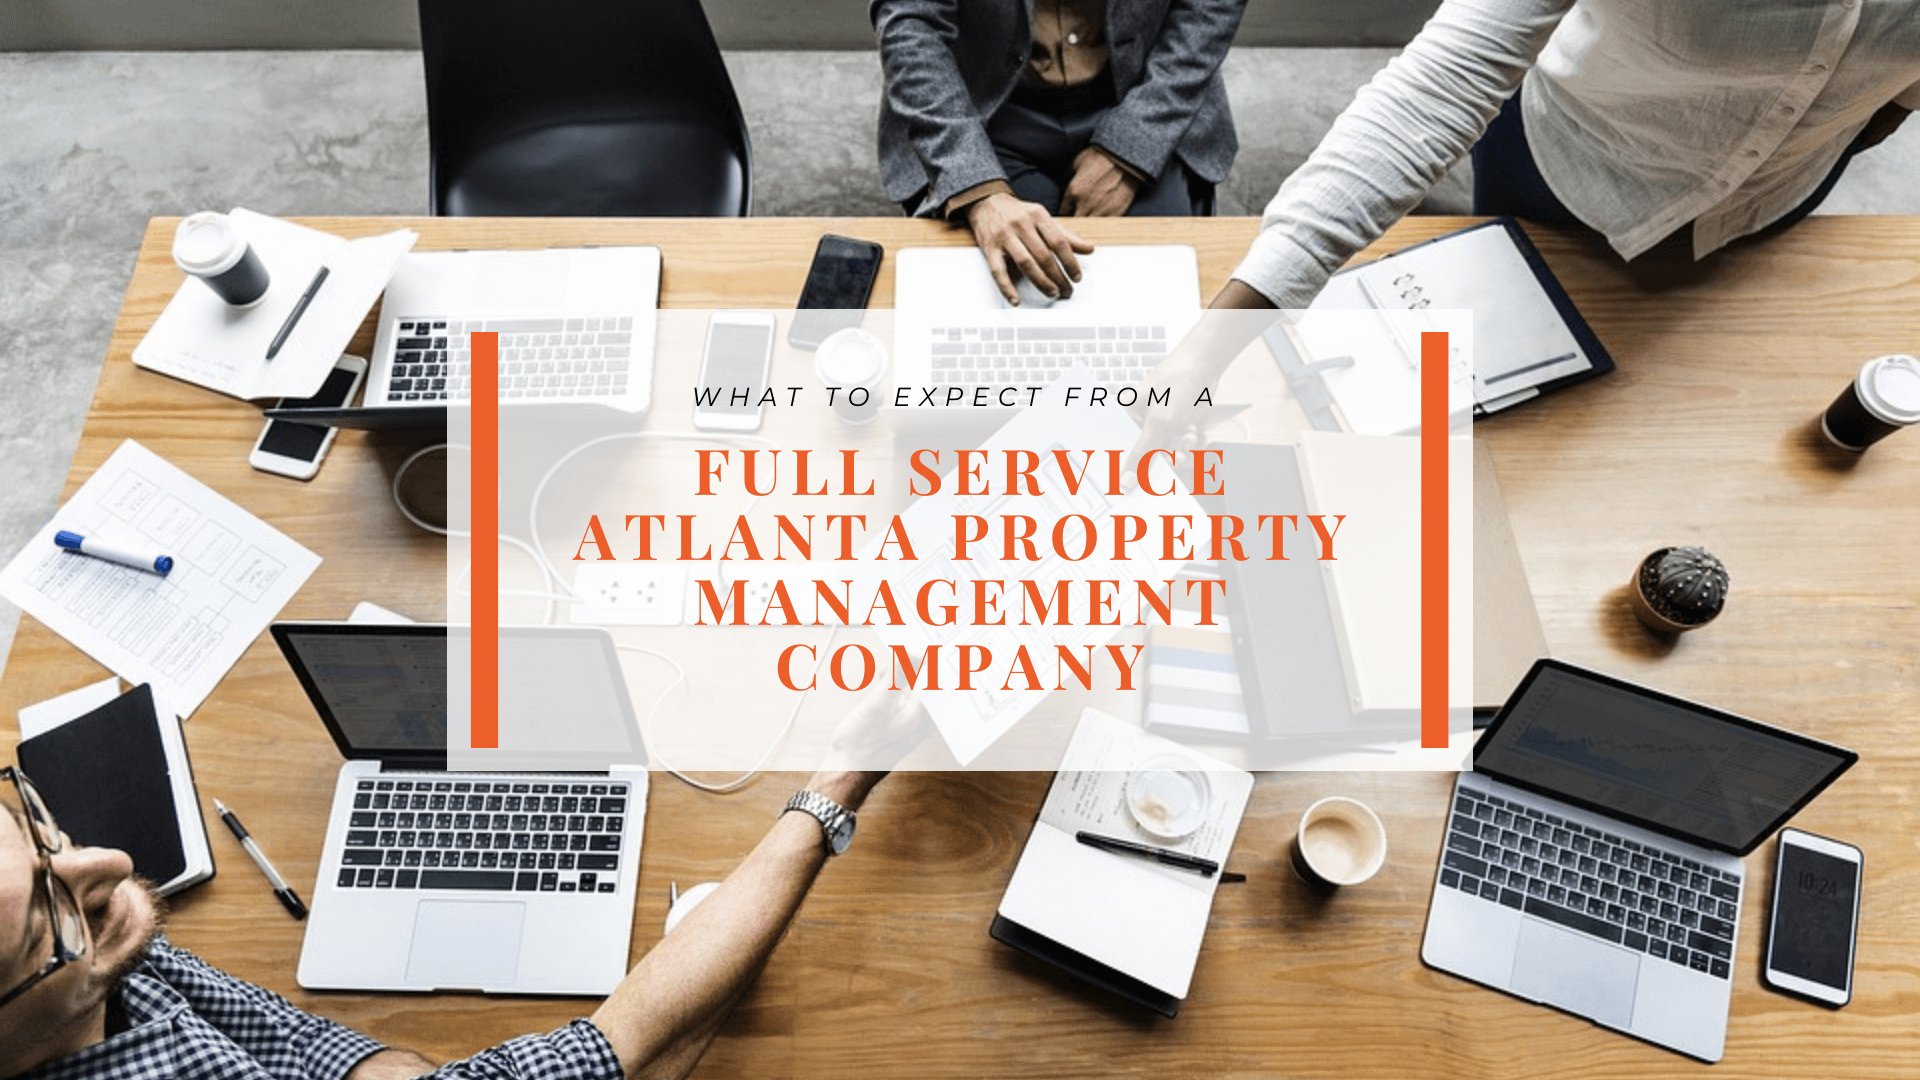 What to Expect From a Full Service Atlanta Property Management Company